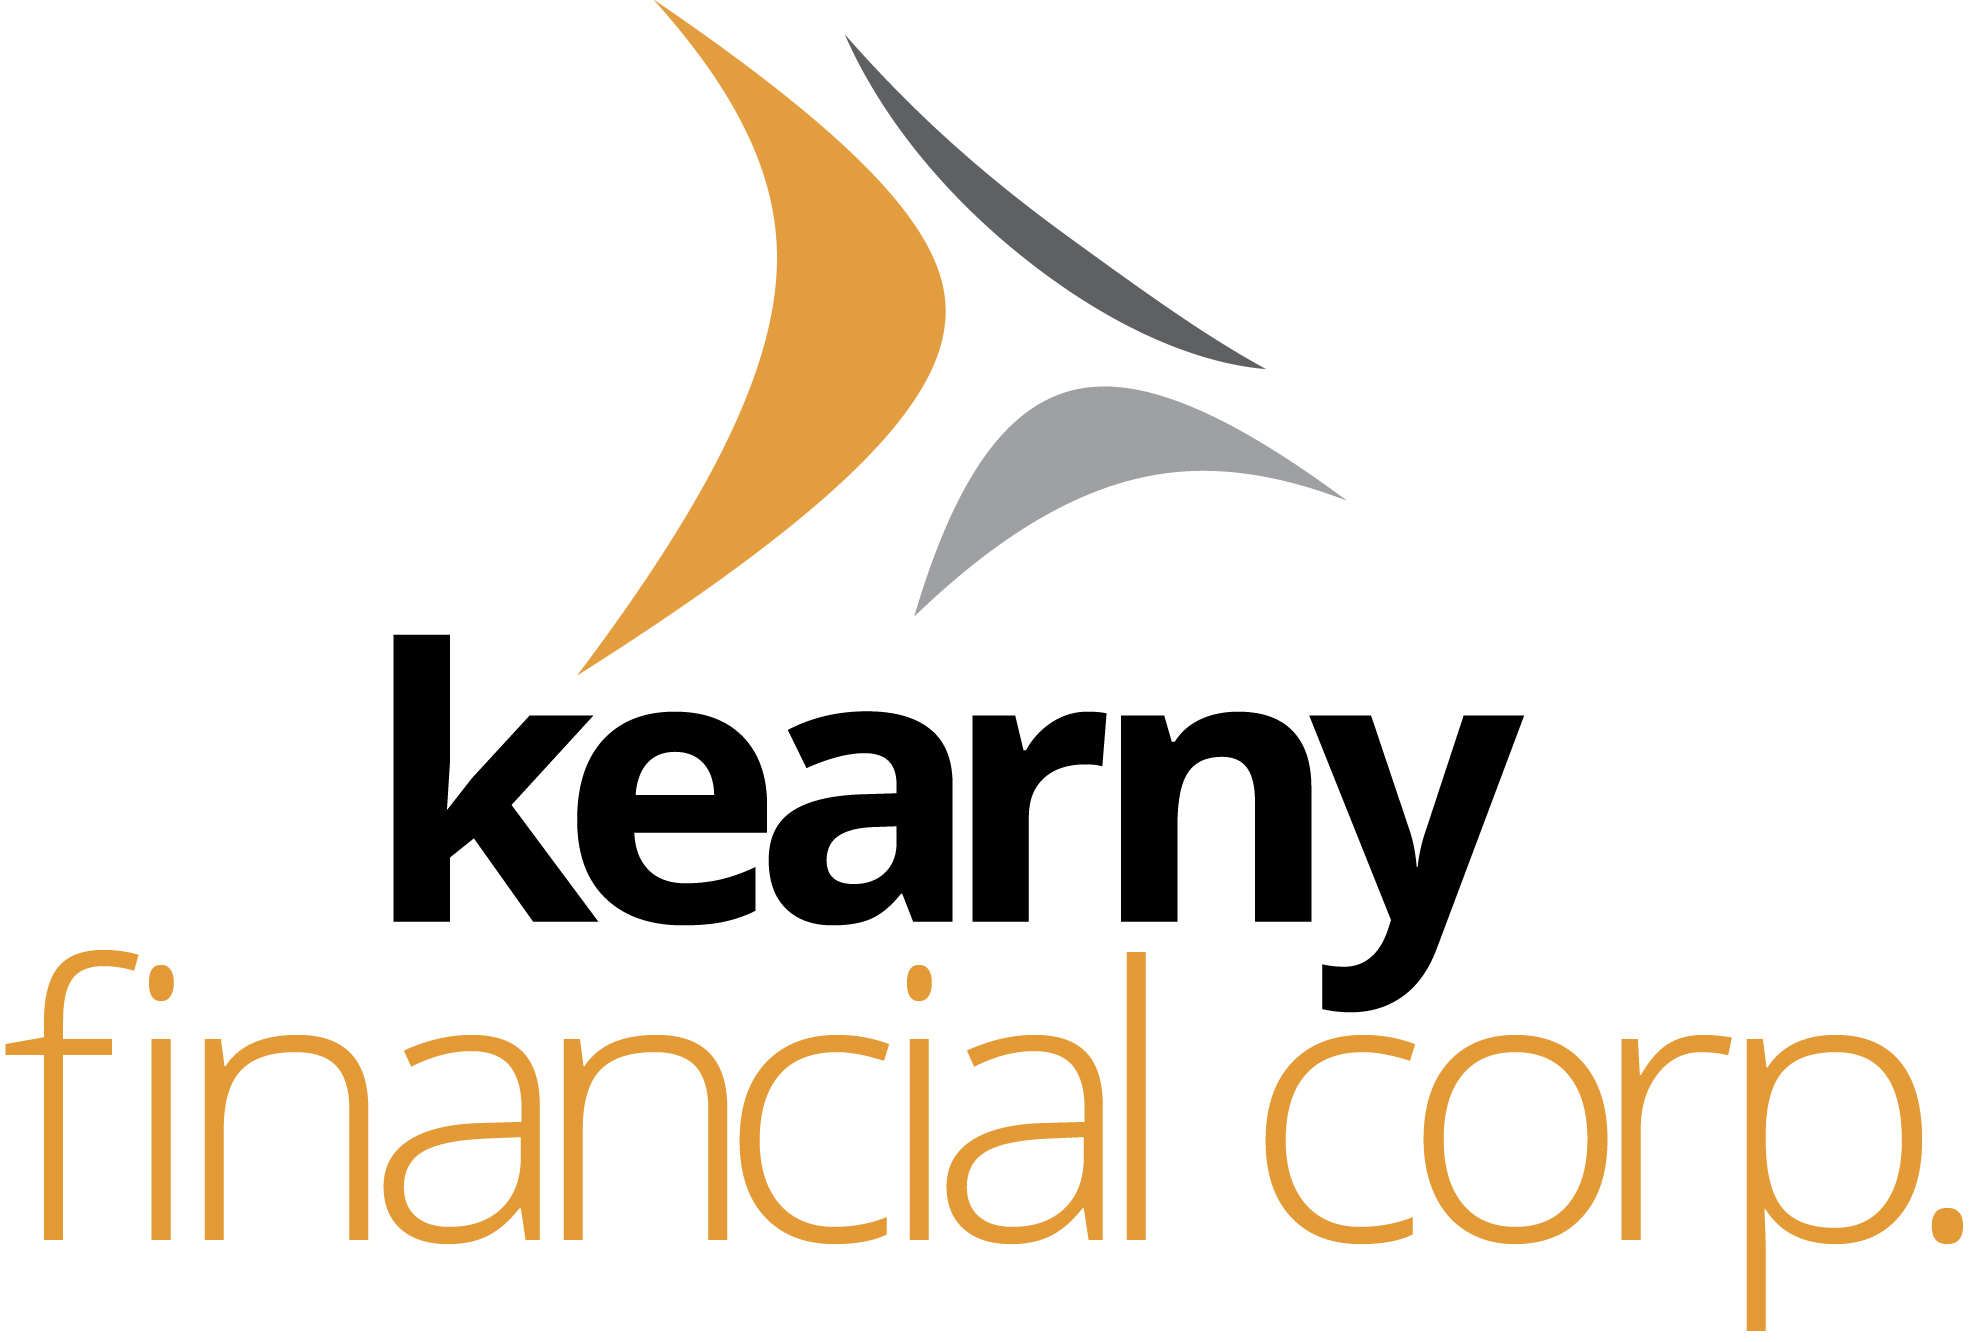 Kearny Financial Corp. Names Chief Operating Officer and Chief Financial Officer